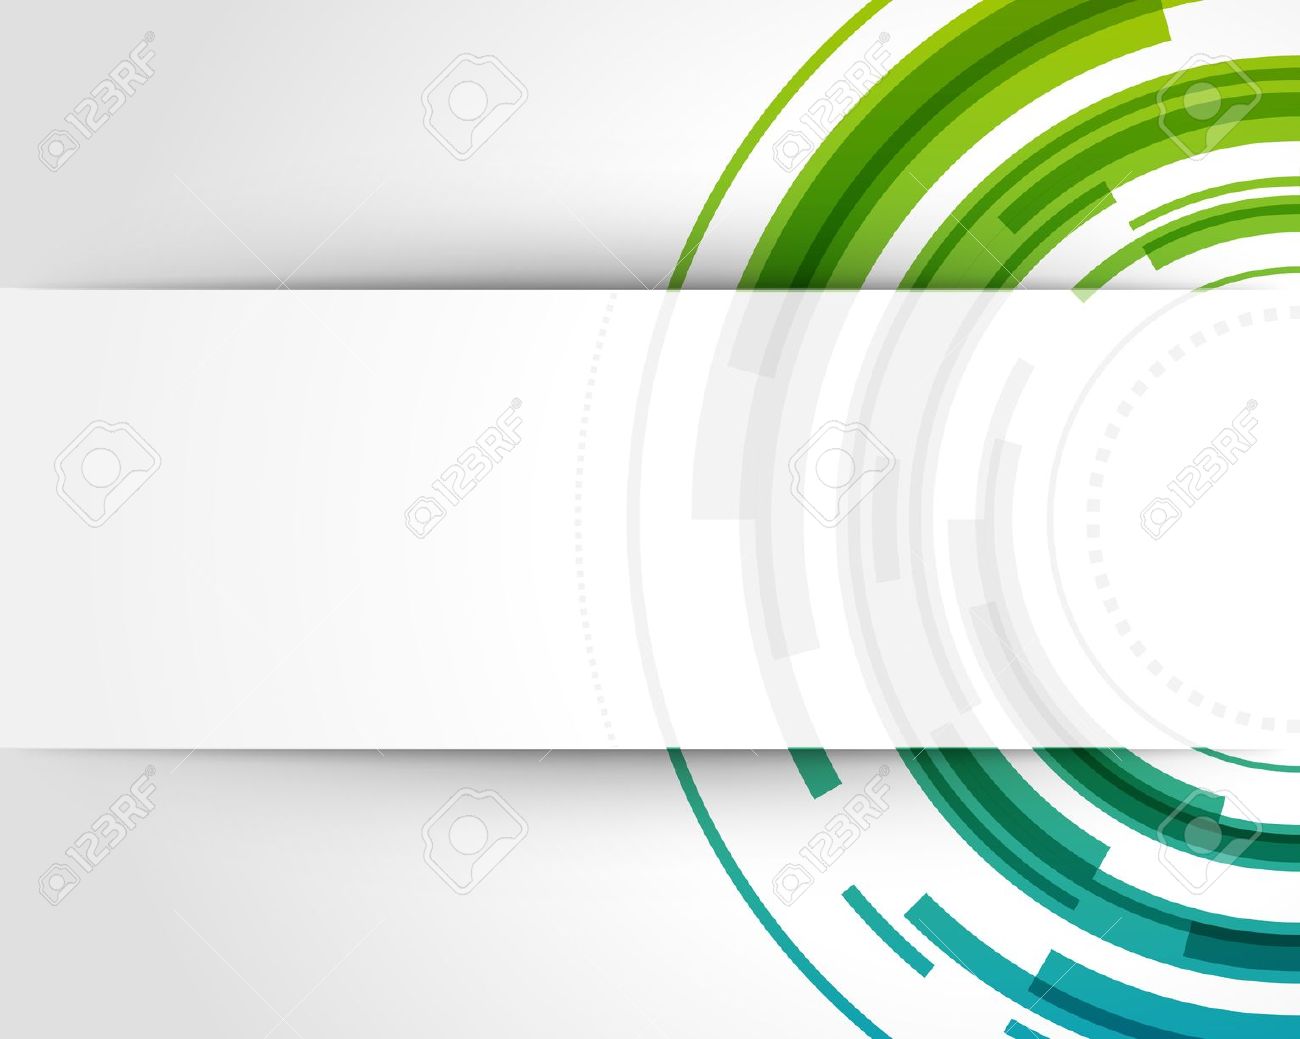 Technology Vector Background